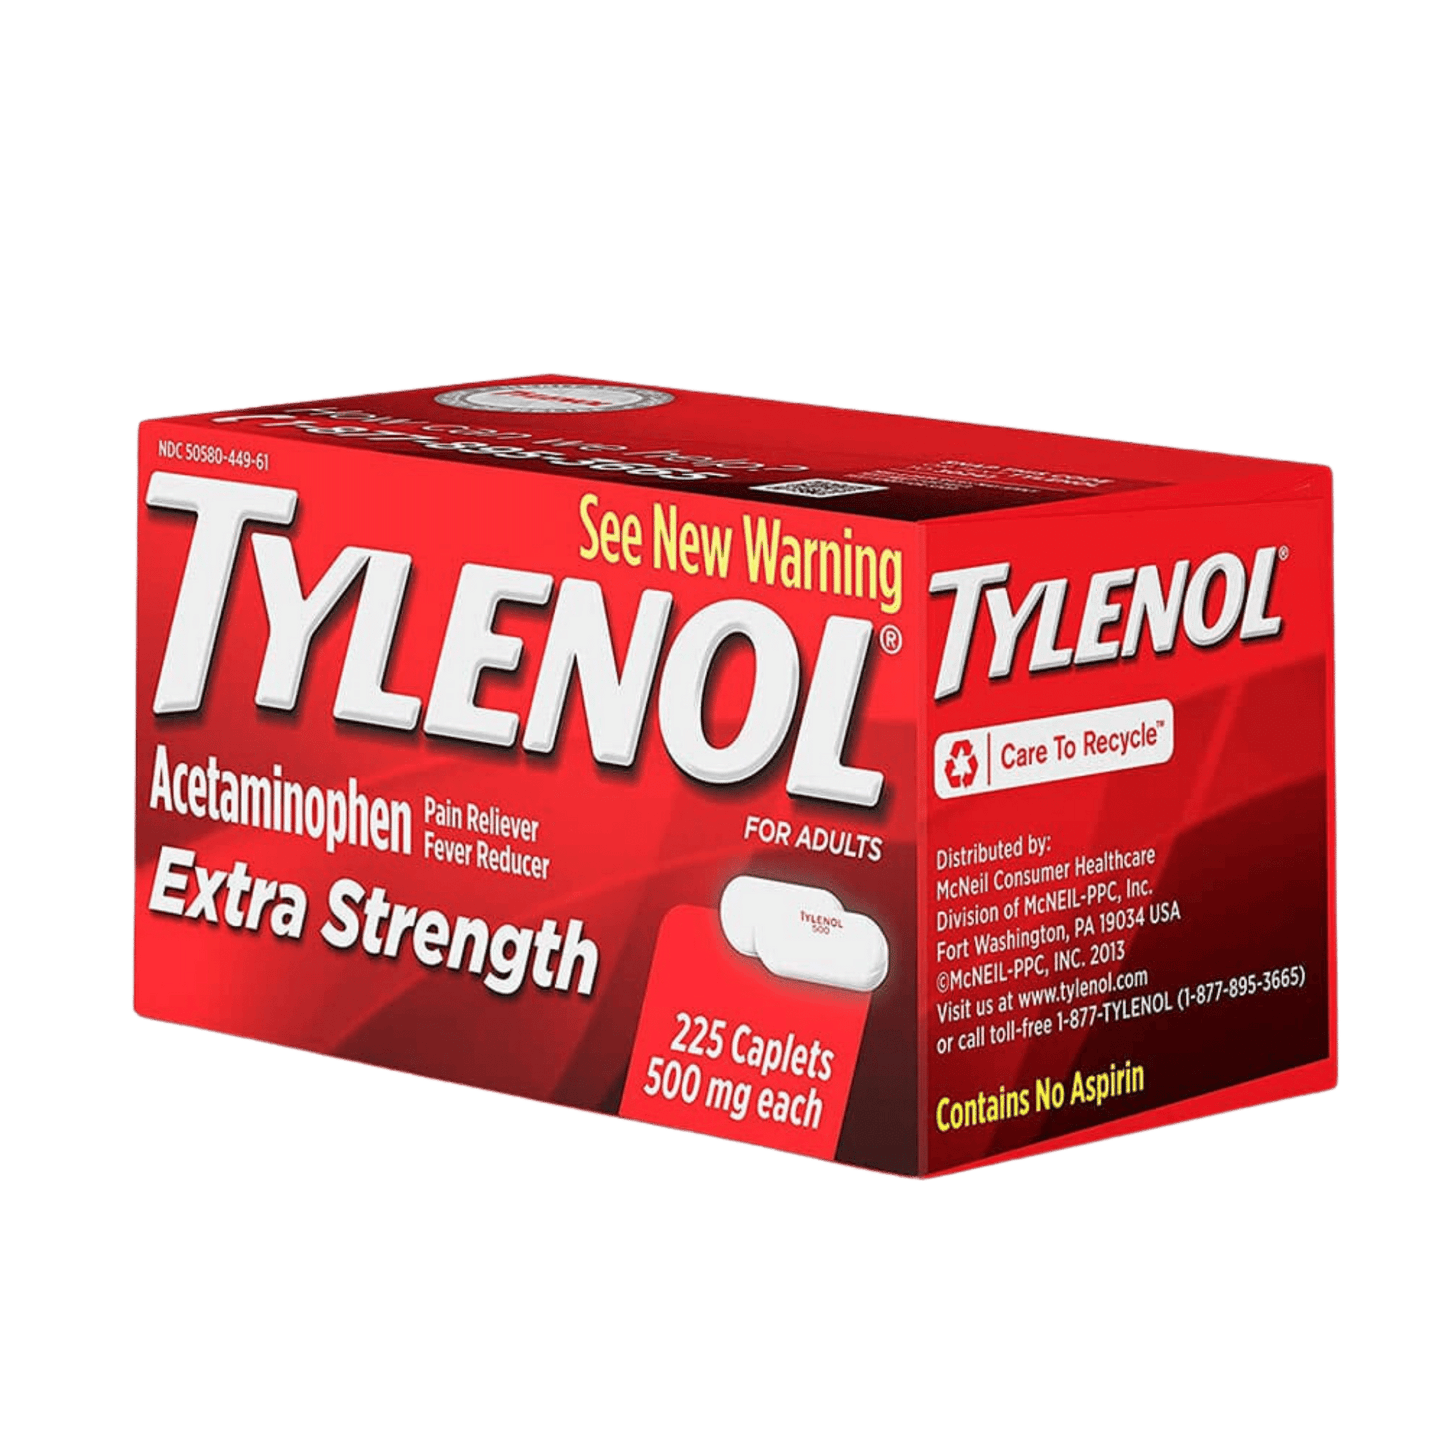 Tylenol Extra Strength Acetaminophen Pain Reliever/Fever Reducer - 225 Capsules Online In Pakistan